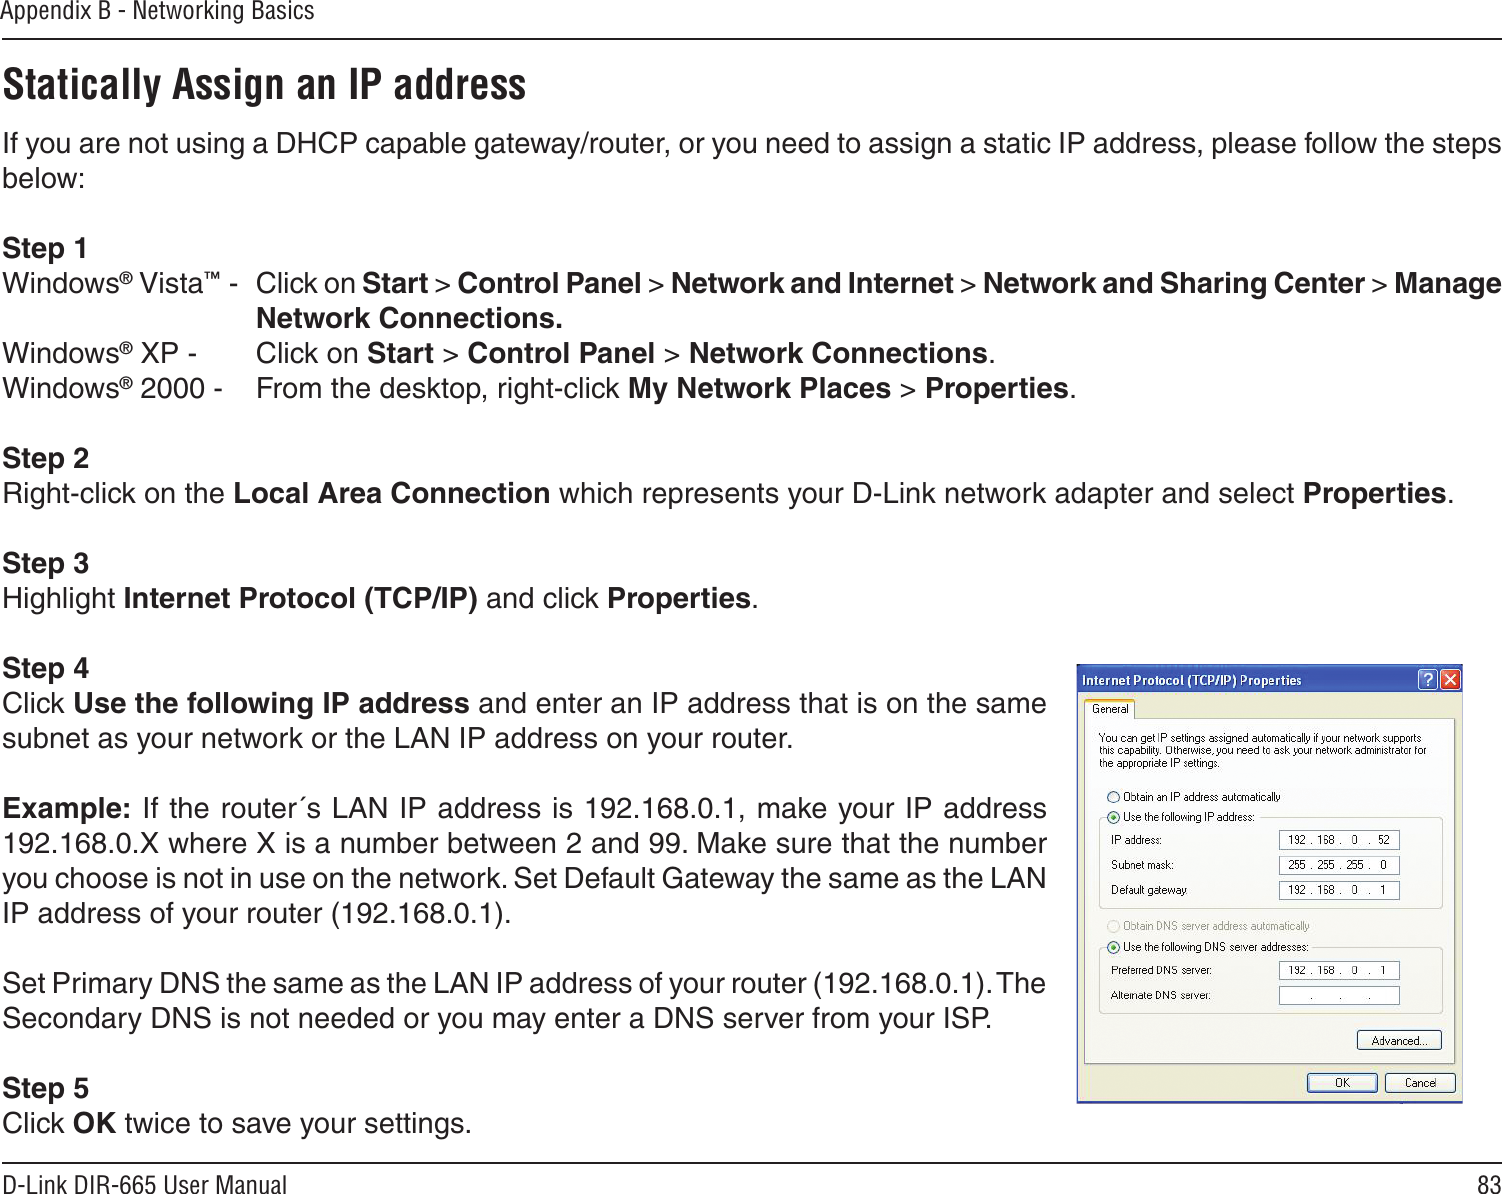 83D-Link DIR-665 User ManualAppendix B - Networking BasicsStatically Assign an IP addressIf you are not using a DHCP capable gateway/router, or you need to assign a static IP address, please follow the steps below:Step 1Windows® Vista™ -  Click on Start &gt; Control Panel &gt; Network and Internet &gt; Network and Sharing Center &gt; Manage Network Connections.Windows® XP -  Click on Start &gt; Control Panel &gt; Network Connections.Windows® 2000 -  From the desktop, right-click My Network Places &gt; Properties.Step 2Right-click on the Local Area Connection which represents your D-Link network adapter and select Properties.Step 3Highlight Internet Protocol (TCP/IP) and click Properties.Step 4Click Use the following IP address and enter an IP address that is on the same subnet as your network or the LAN IP address on your router. Example: If the router´s LAN IP address is 192.168.0.1, make your IP address 192.168.0.X where X is a number between 2 and 99. Make sure that the number you choose is not in use on the network. Set Default Gateway the same as the LAN IP address of your router (192.168.0.1). Set Primary DNS the same as the LAN IP address of your router (192.168.0.1). The Secondary DNS is not needed or you may enter a DNS server from your ISP.Step 5Click OK twice to save your settings.